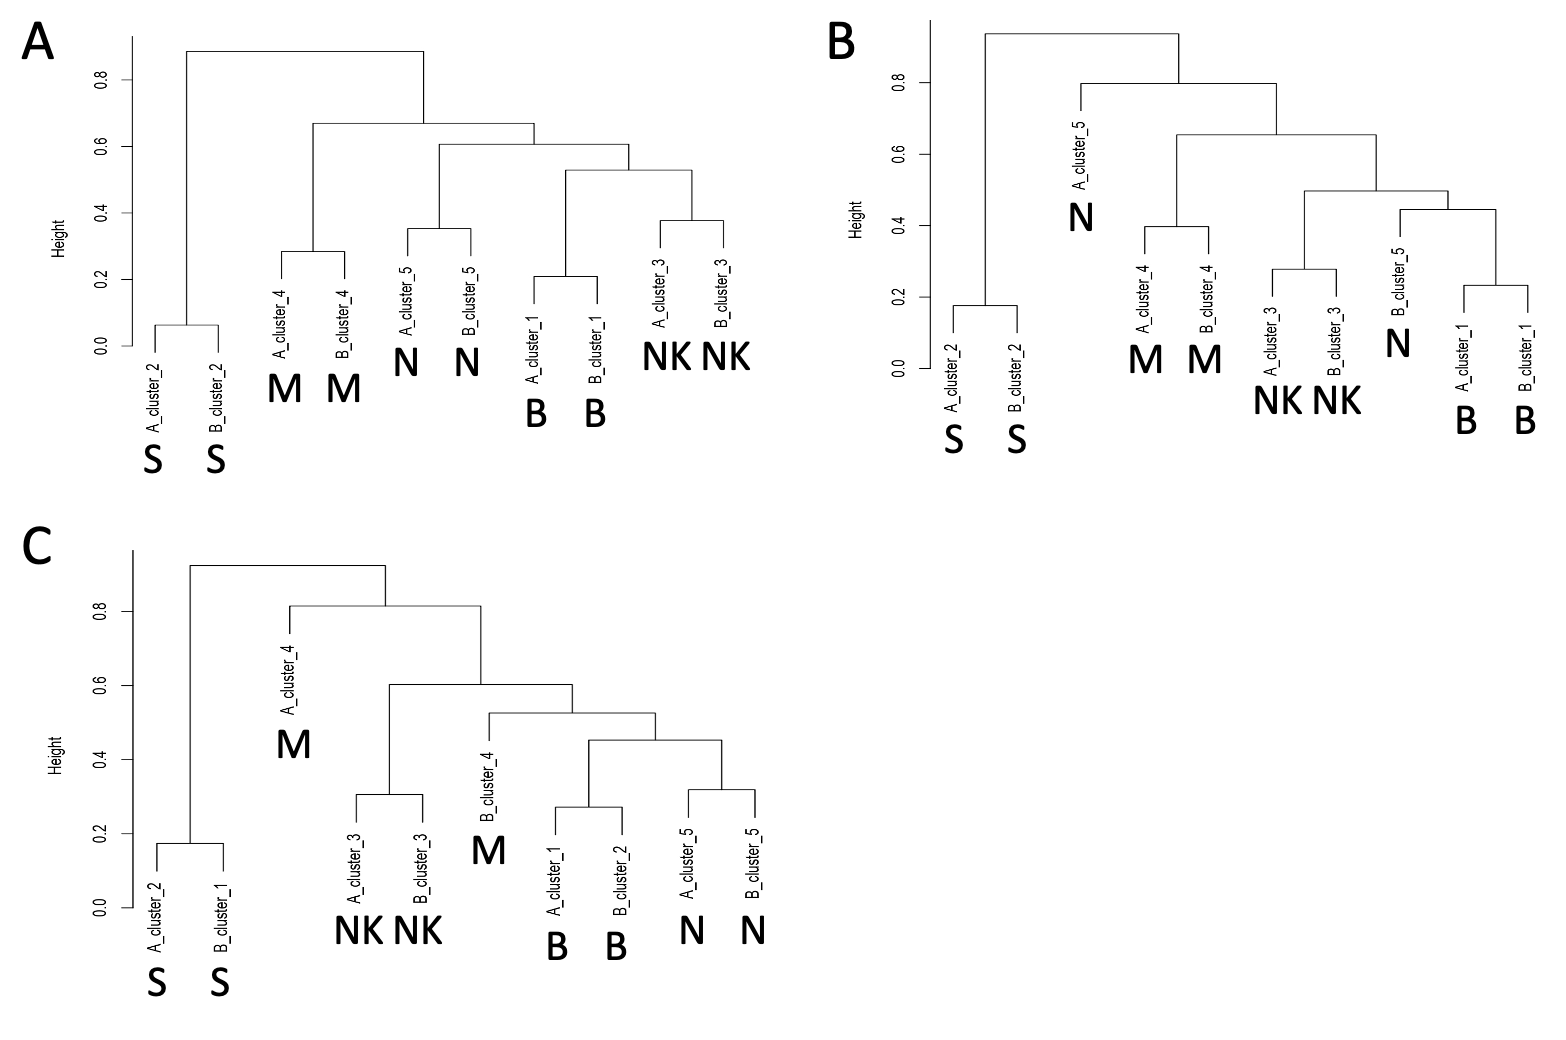 SIMLR clustering with k=5. A) Hierarchical clustering of the BC distance between setA and setA depleted of 5\% cells. B) Hierarchical clustering of the BC distance between setA and setA depleted of 10\% cells. C) Hierarchical clustering of the BC distance between setA and setA depleted of 15\% cells